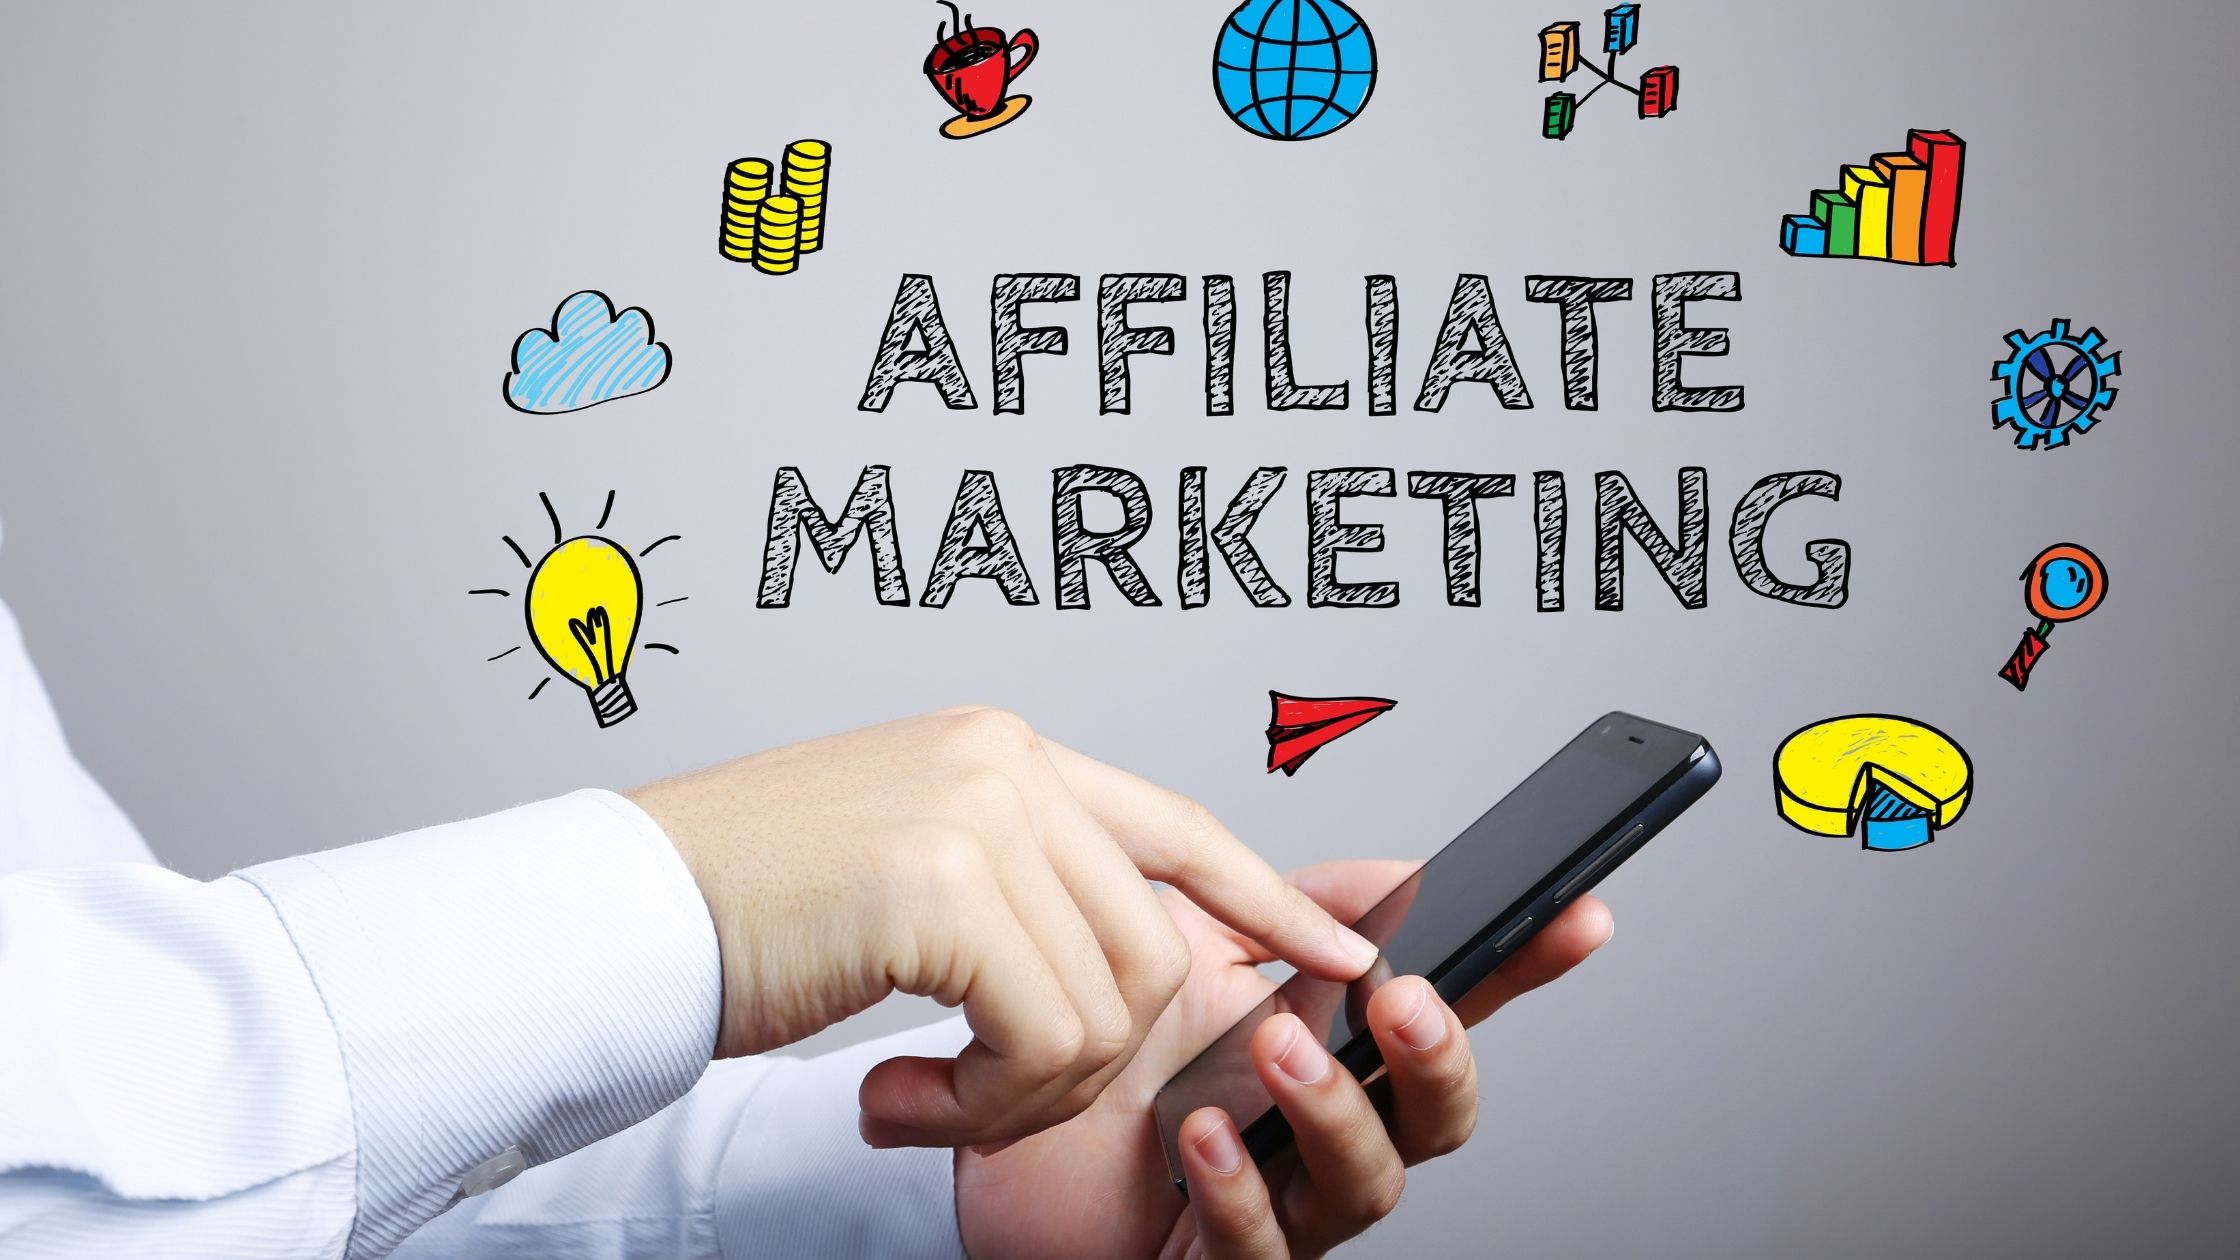 how to make money with Affiliate Marketing